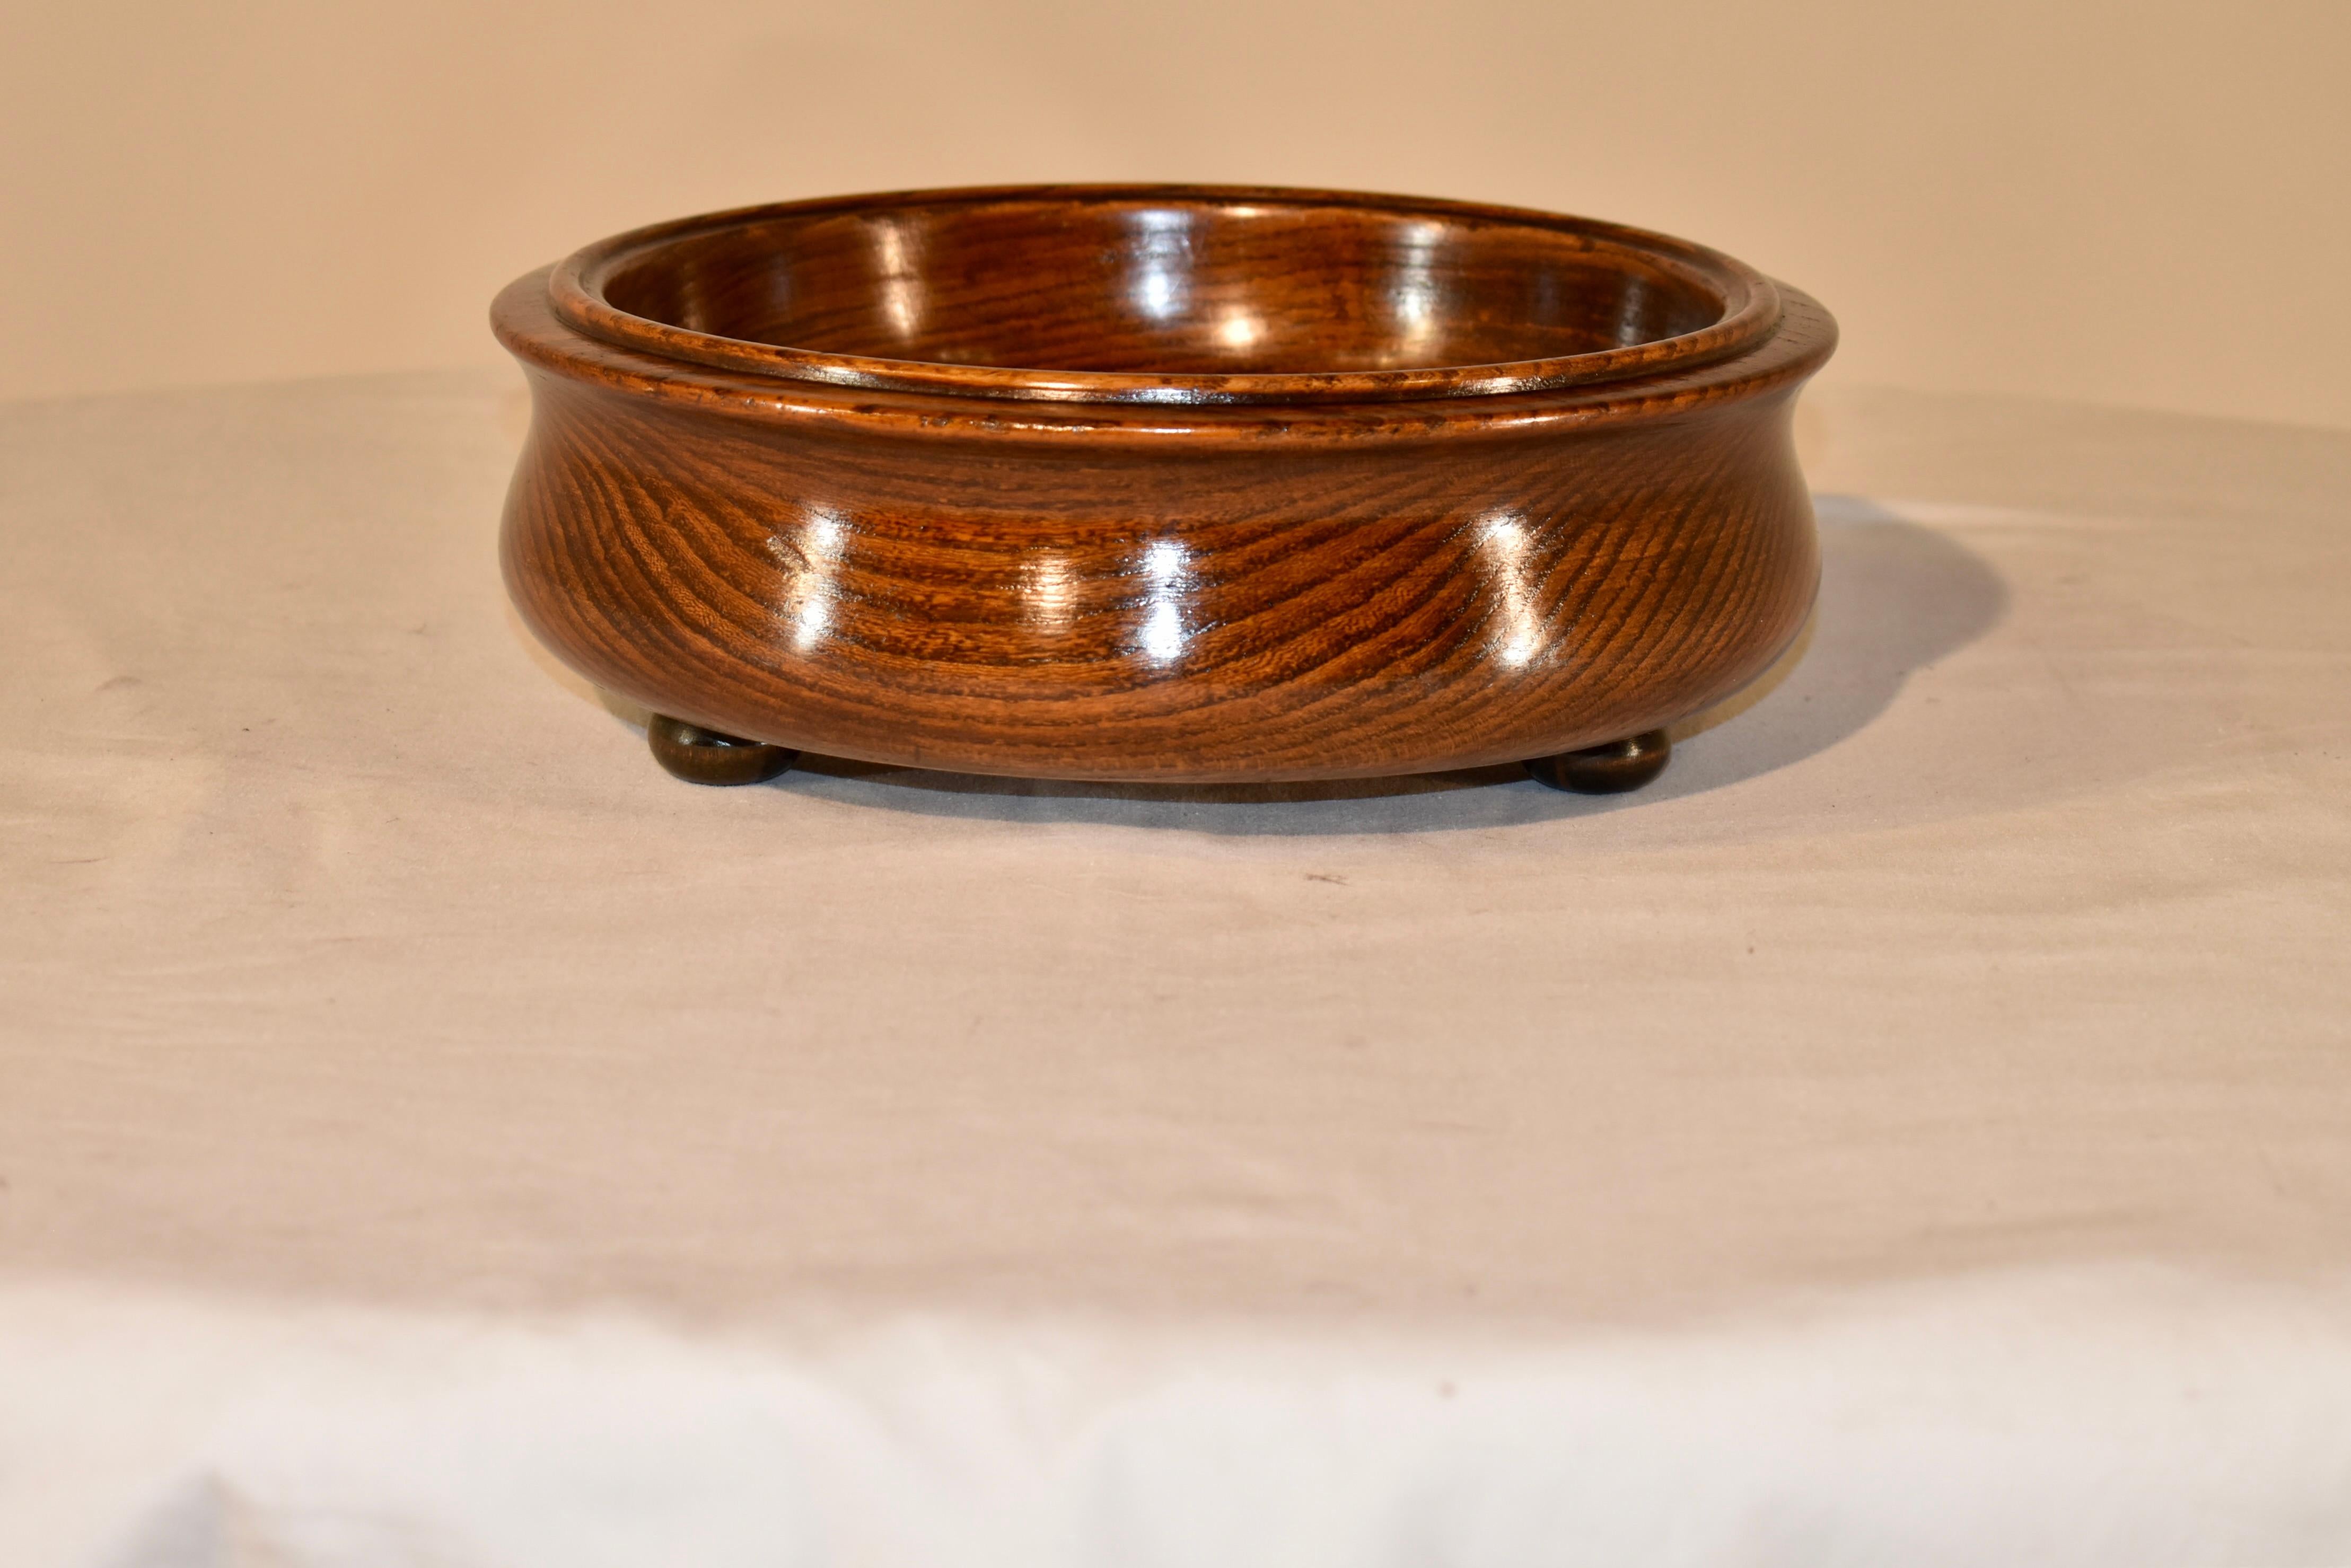 Edwardian hand-turned oak bowl from England, circa 1900. It has a lovely shape and beautiful graining. Raised on three turned feet.